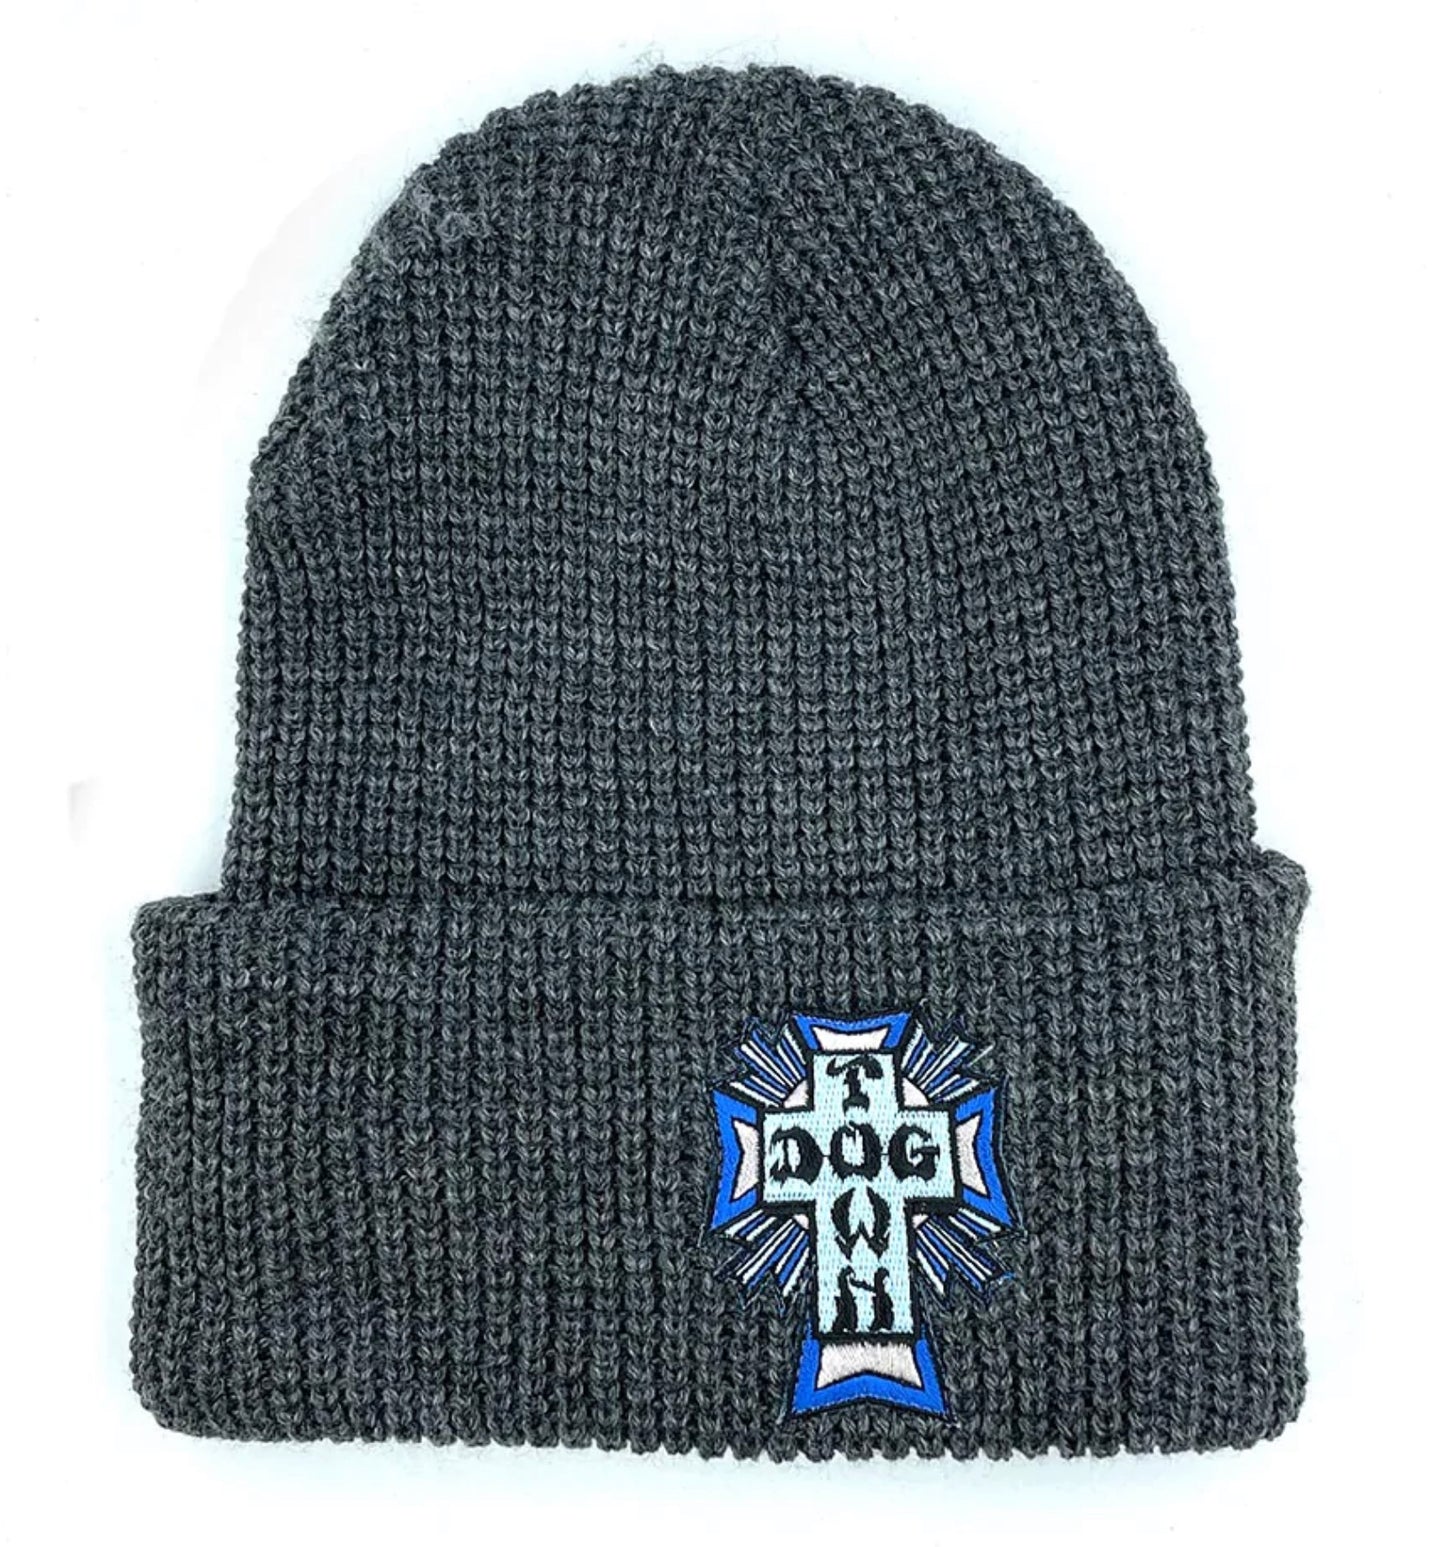 Dogtown Skateboards - Dogtown Blue Cross Patch Toque